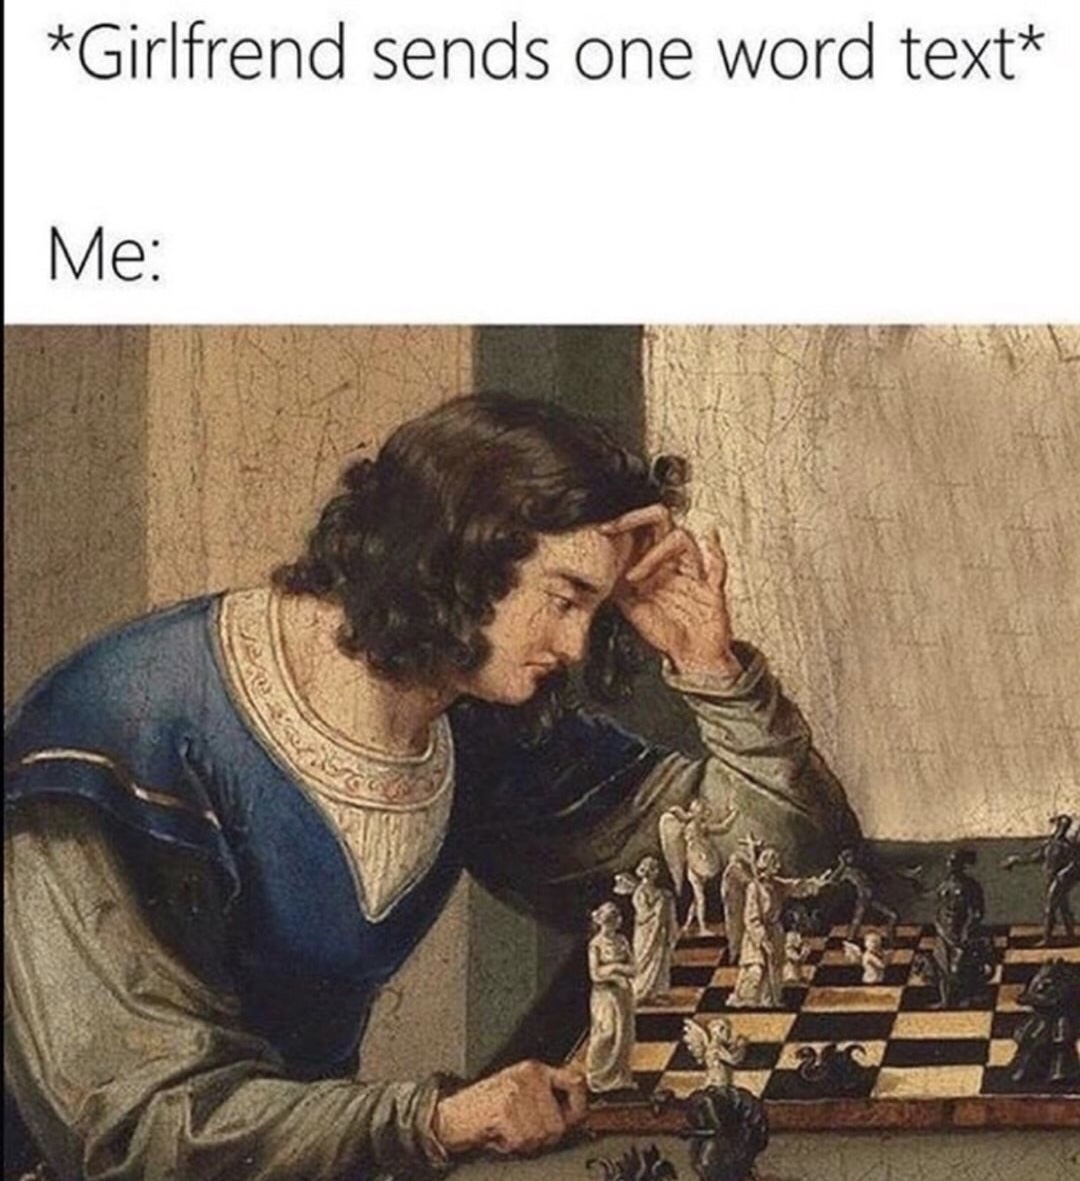 classical meme about how it feels when a girl sends a 1 word text